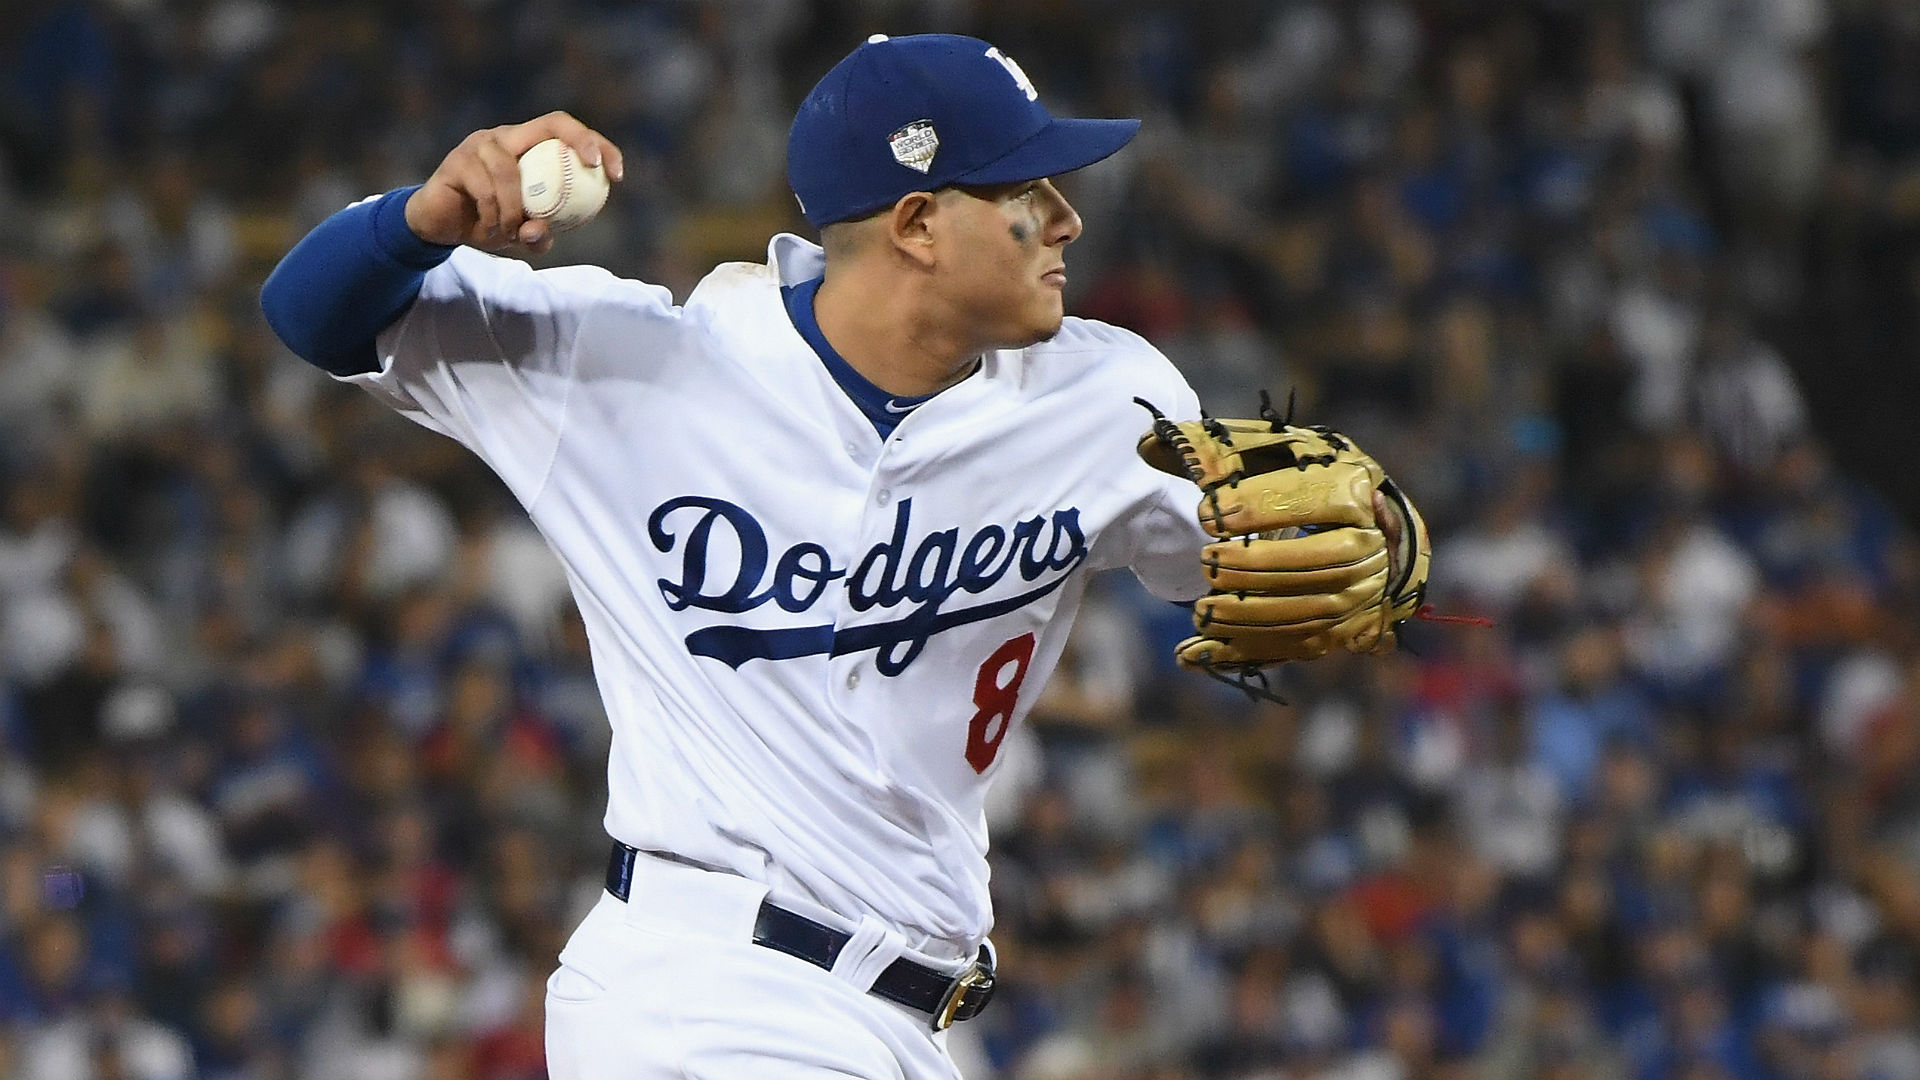 Machado has made four All-Star teams and won two Gold Glove awards in his seven-year MLB career.